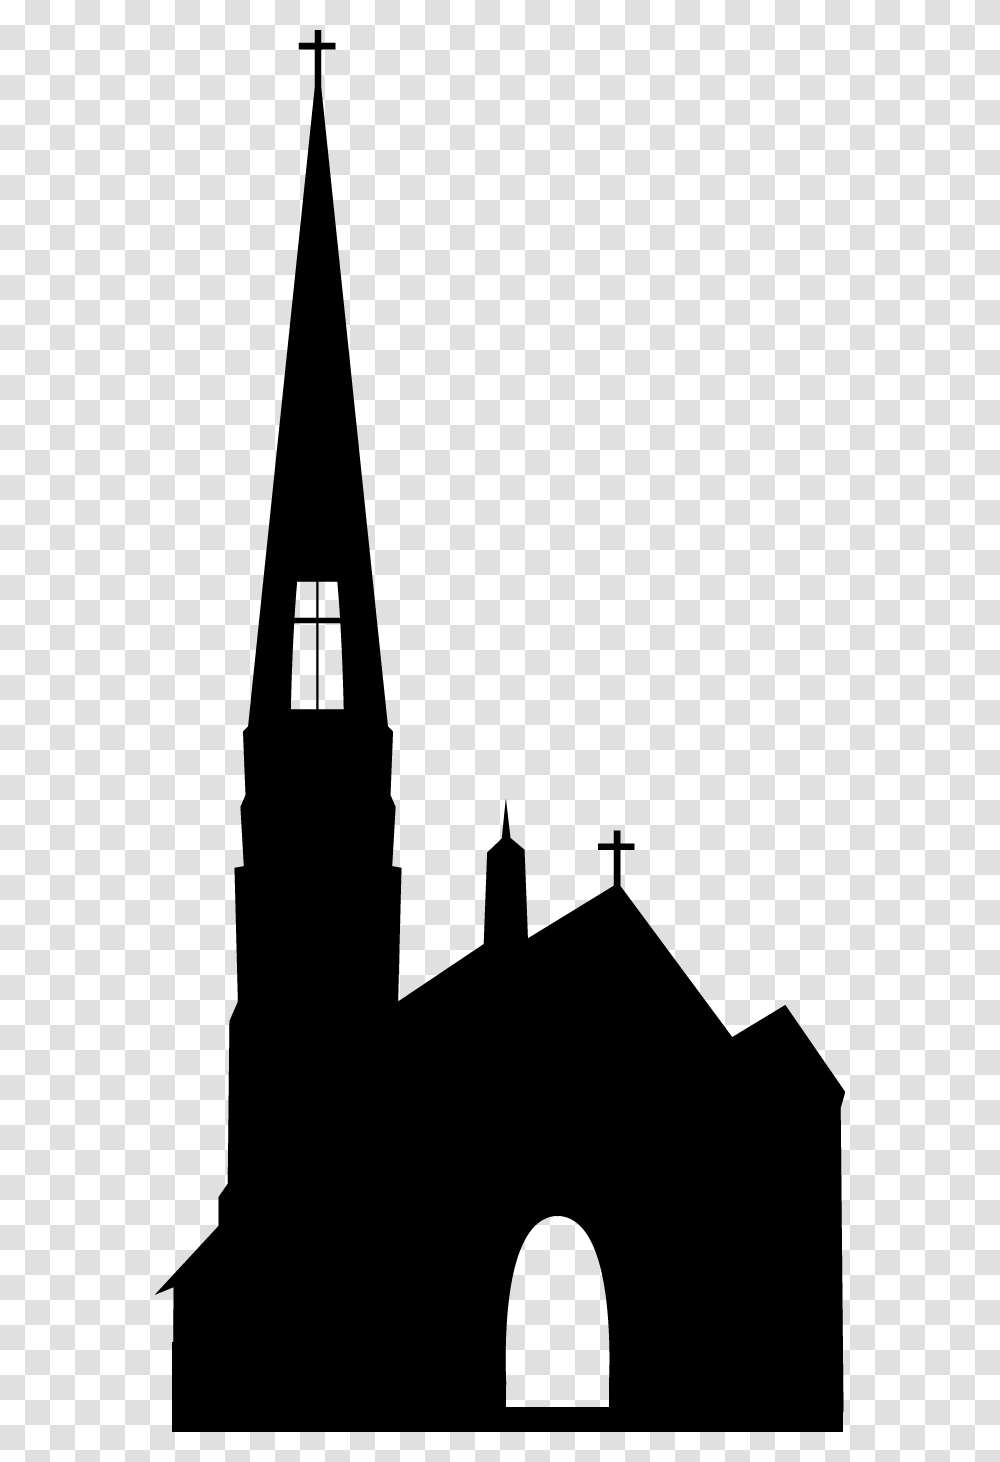 Erqi Memorial Tower Silhouette Church Church Silhouette, Spire, Architecture, Building, Steeple Transparent Png